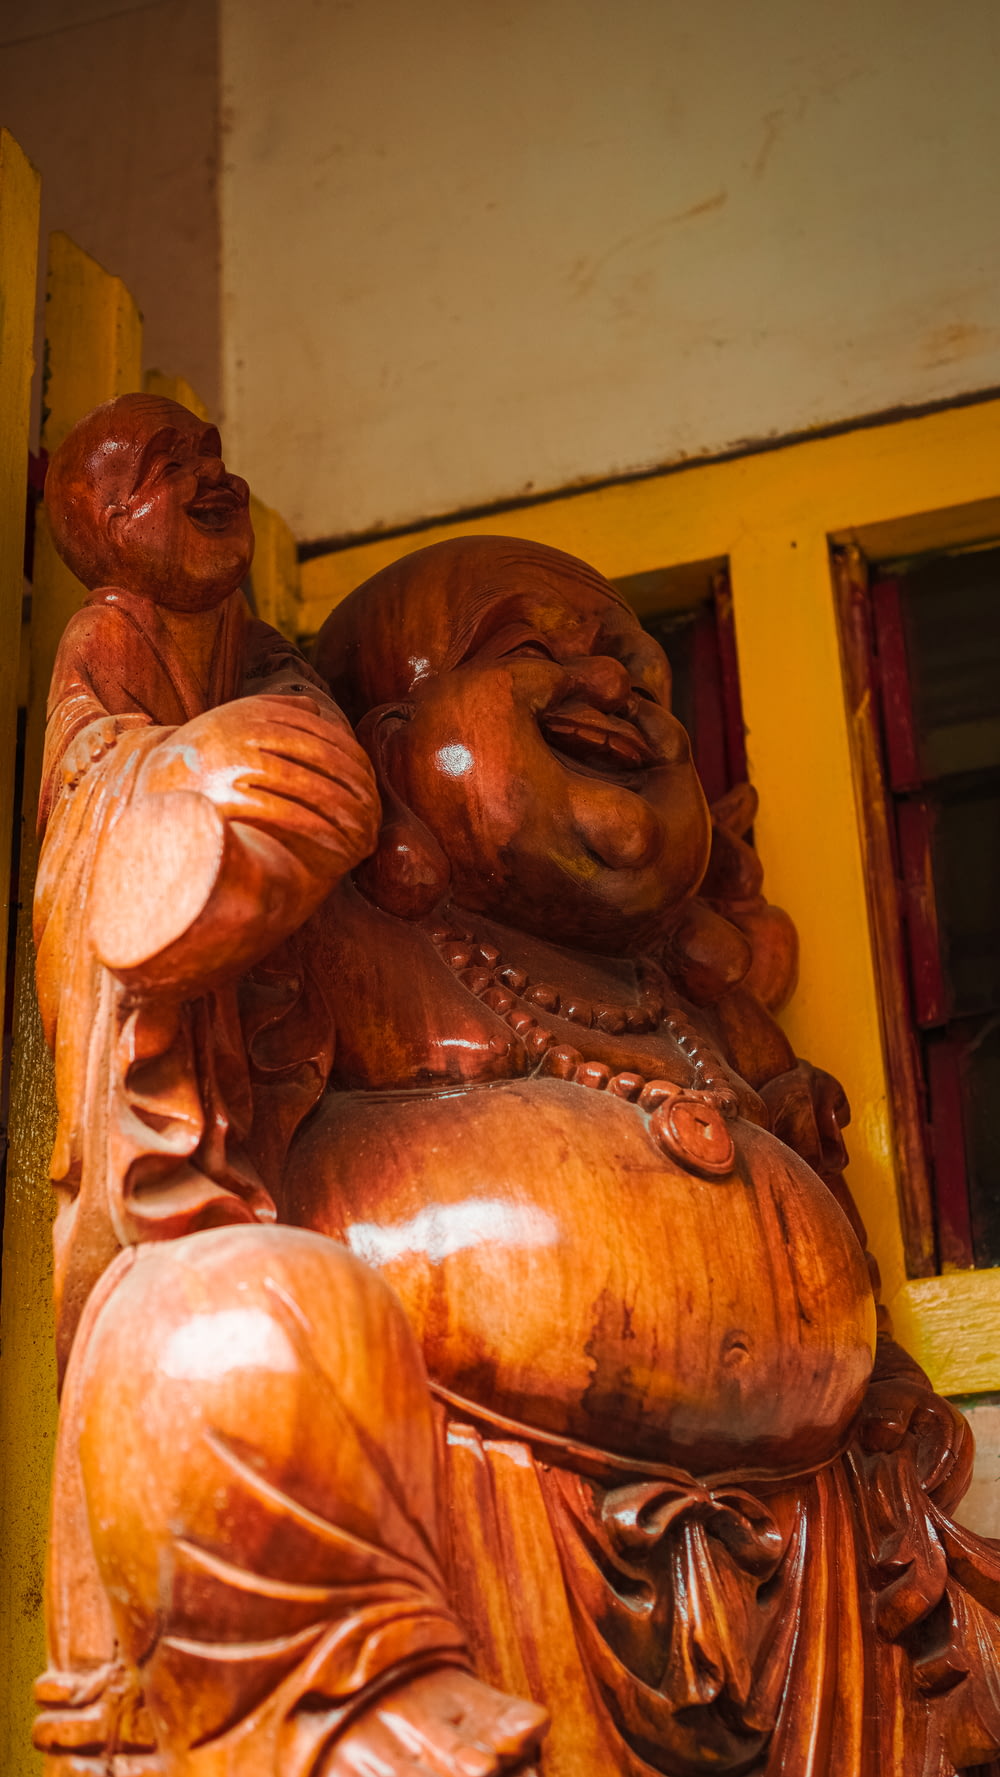 a wooden statue of a laughing buddha